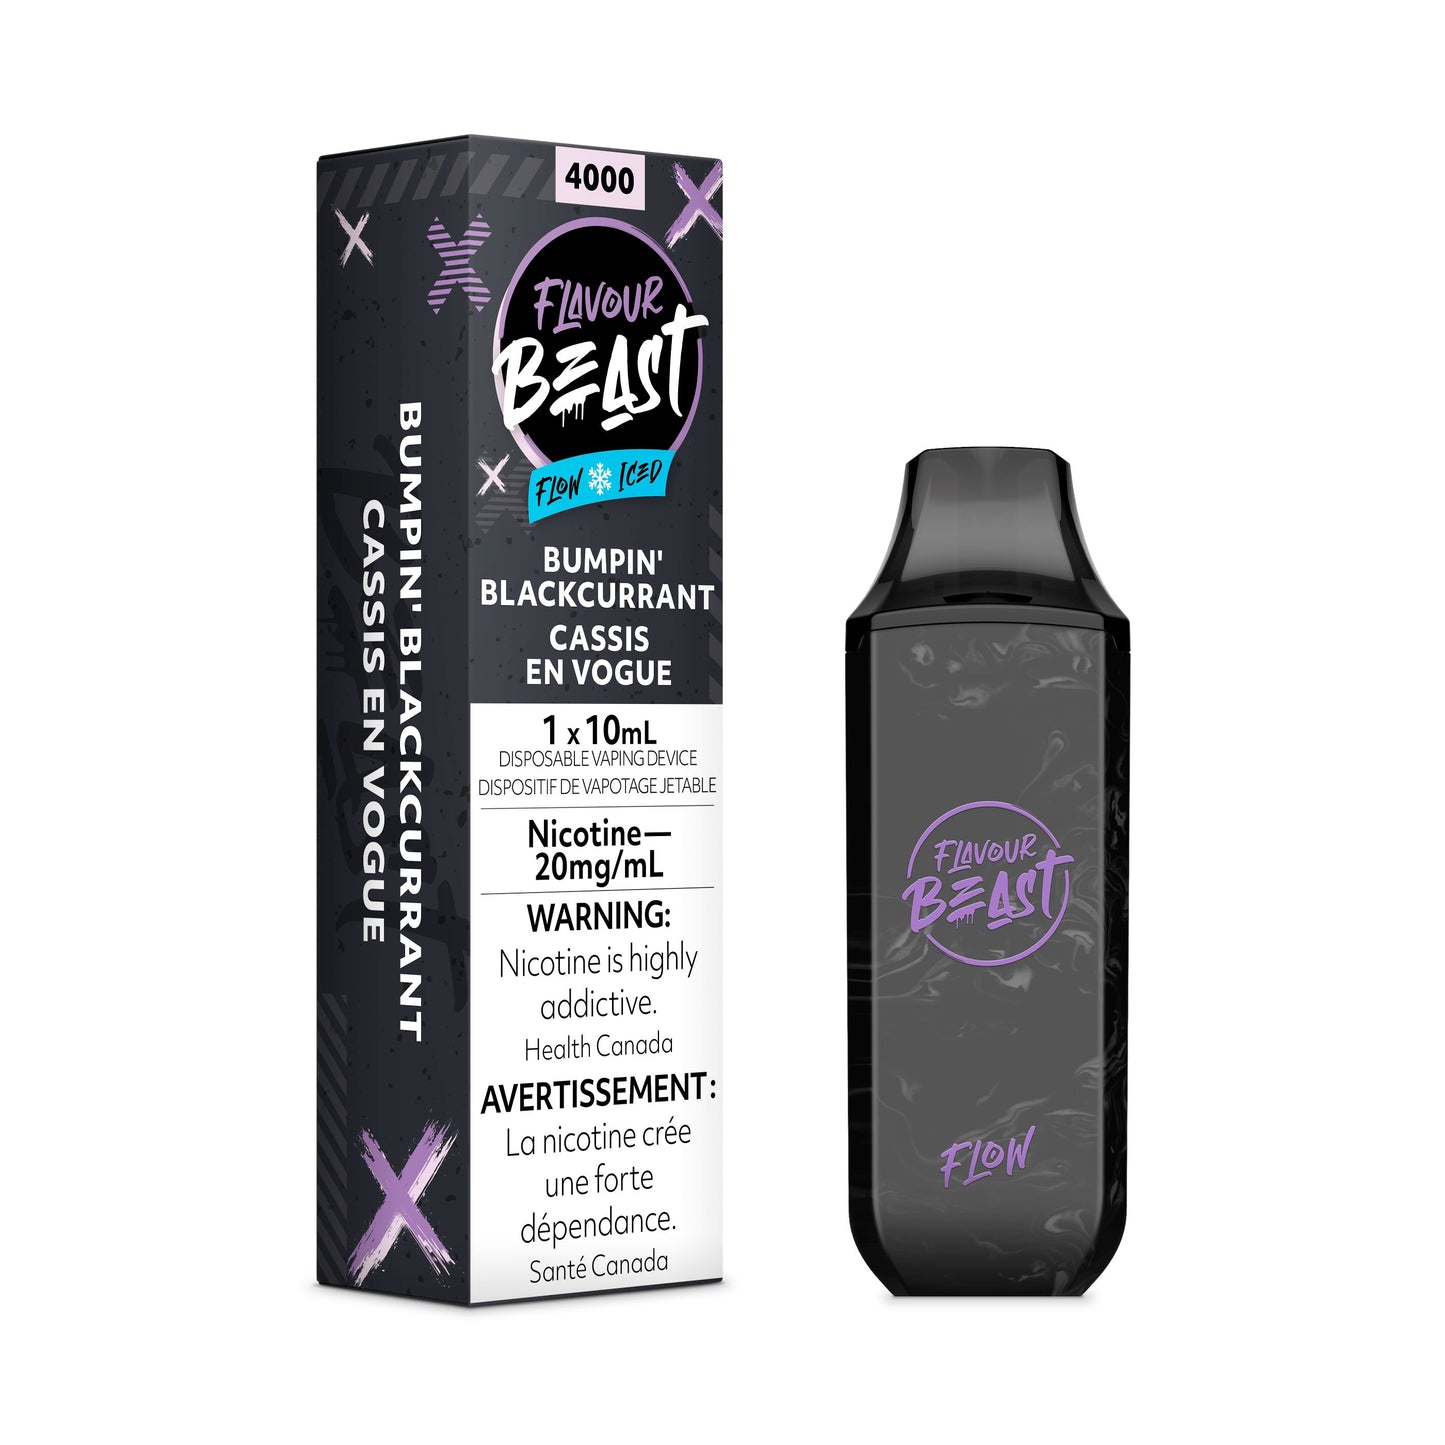 Bumpin' Black Currant Ice - FBD Disposable Flavour Beast Flow 